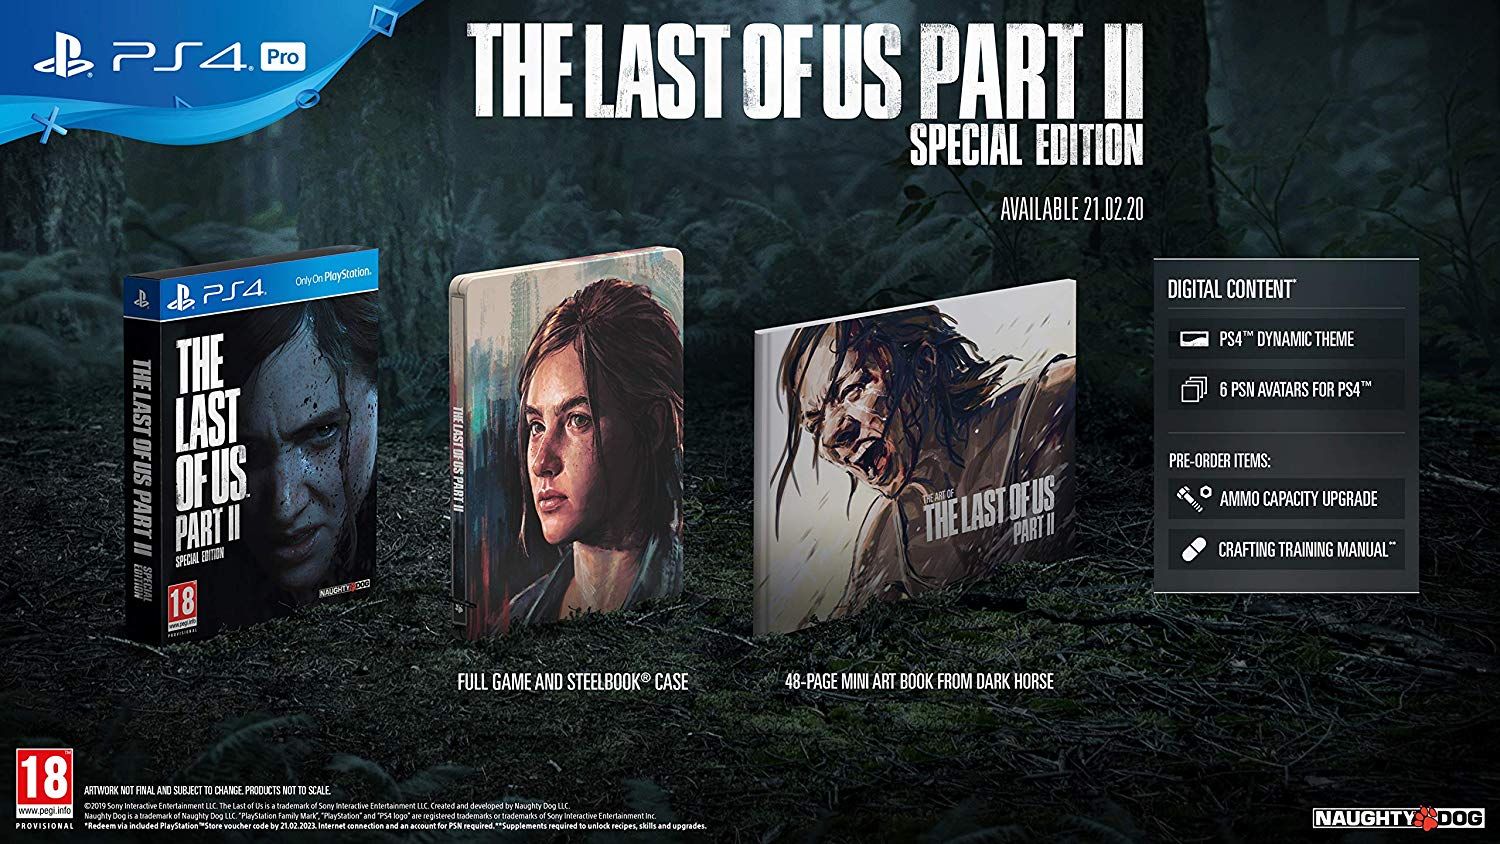 All the extras in the Special Edition of The Last of Us 2